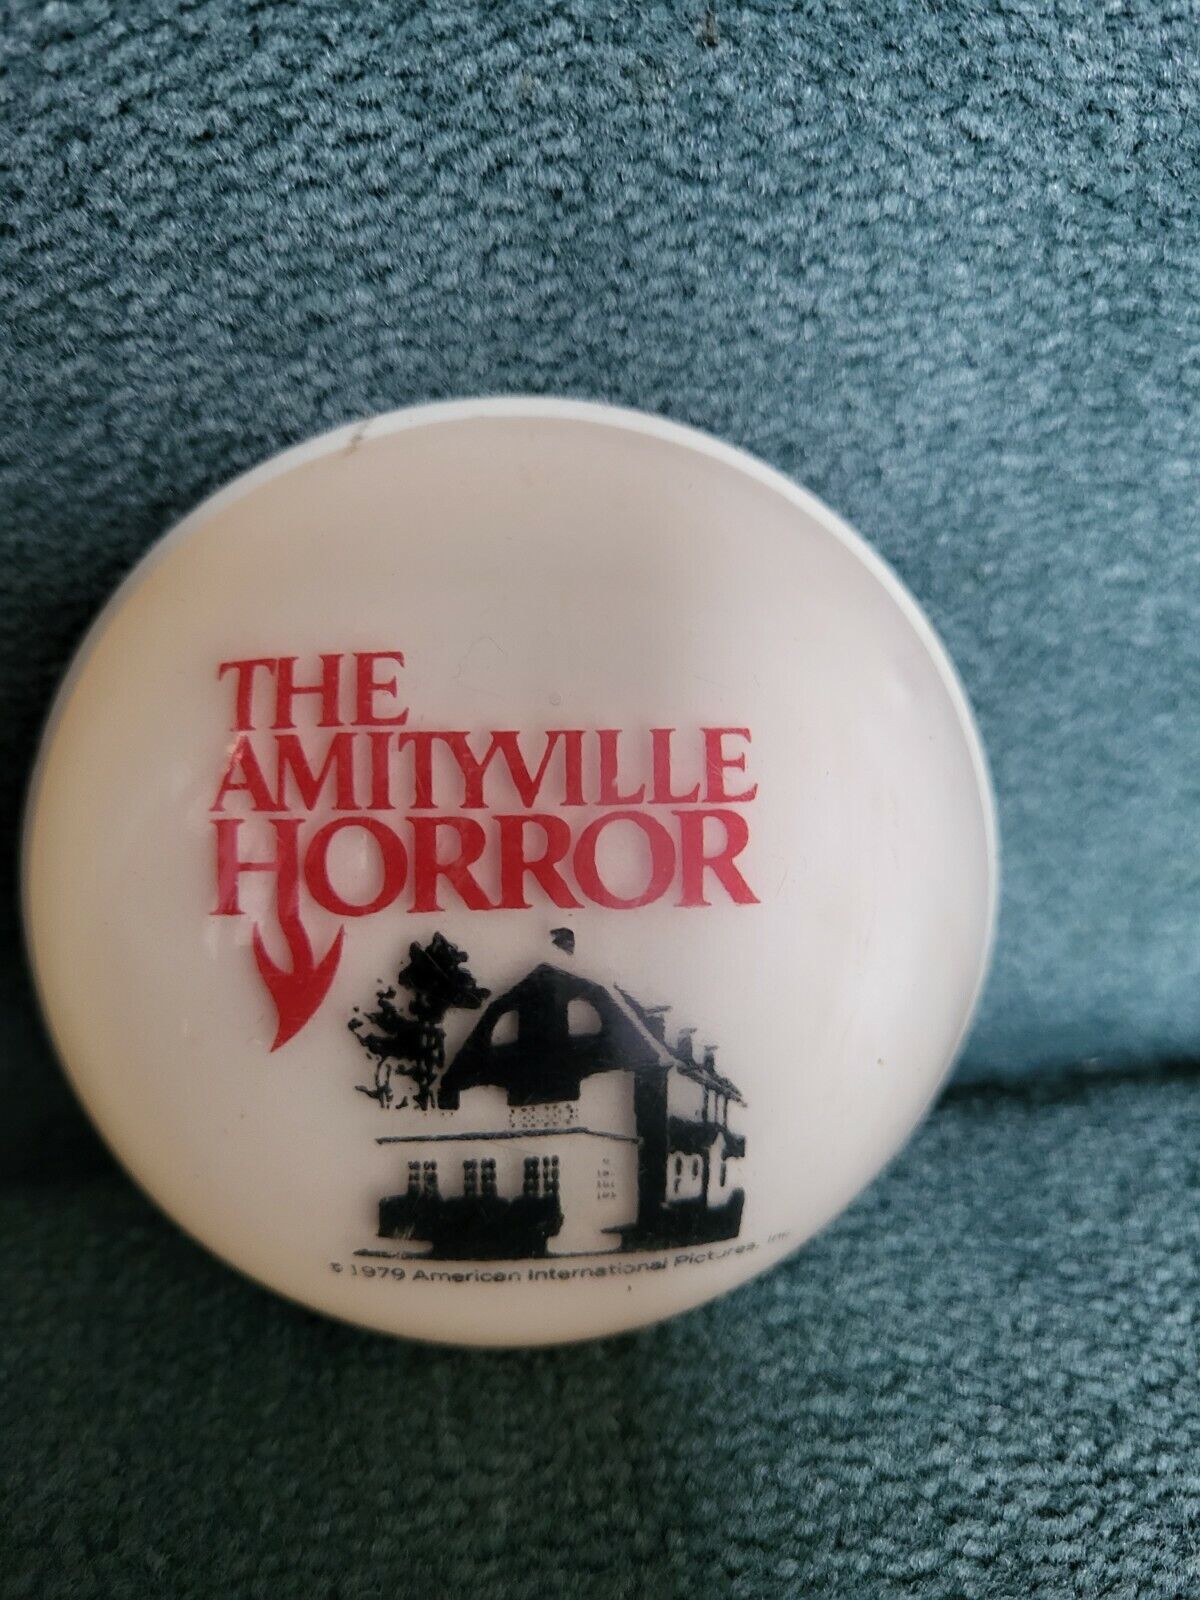 Vintage The Amityville Horror 1979 American International Pictures,paperweight